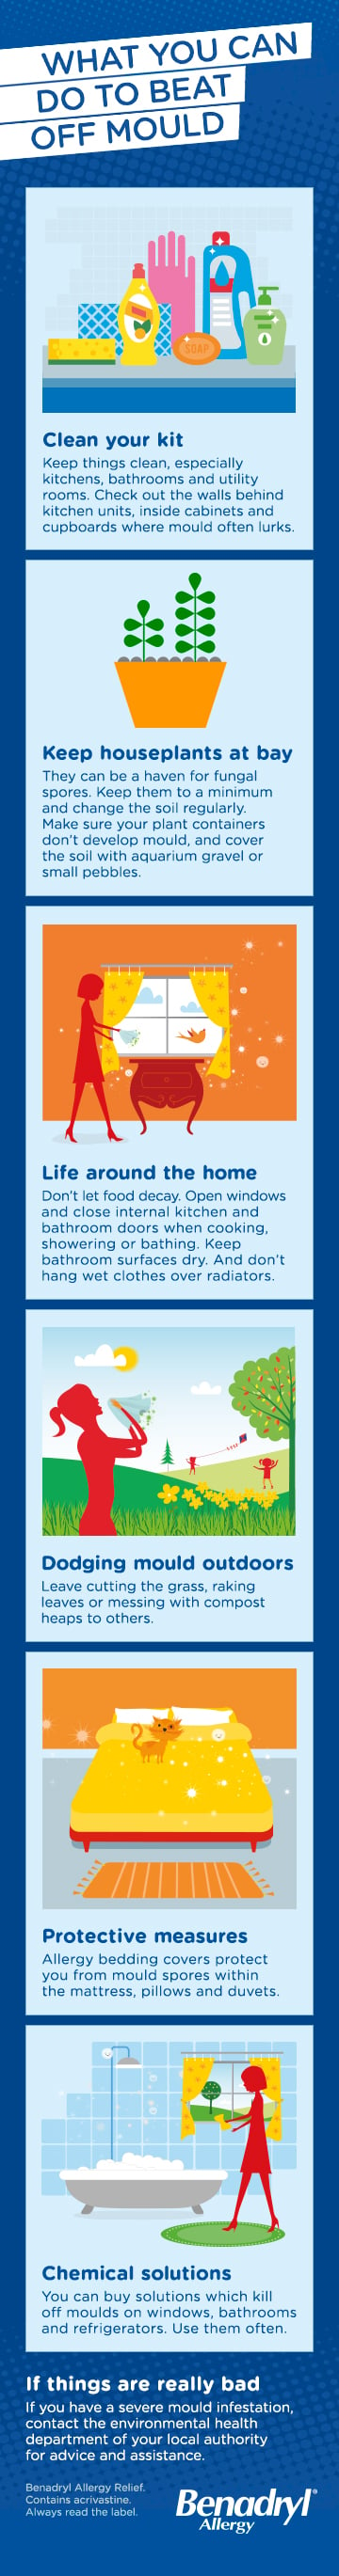 Mould Infographic